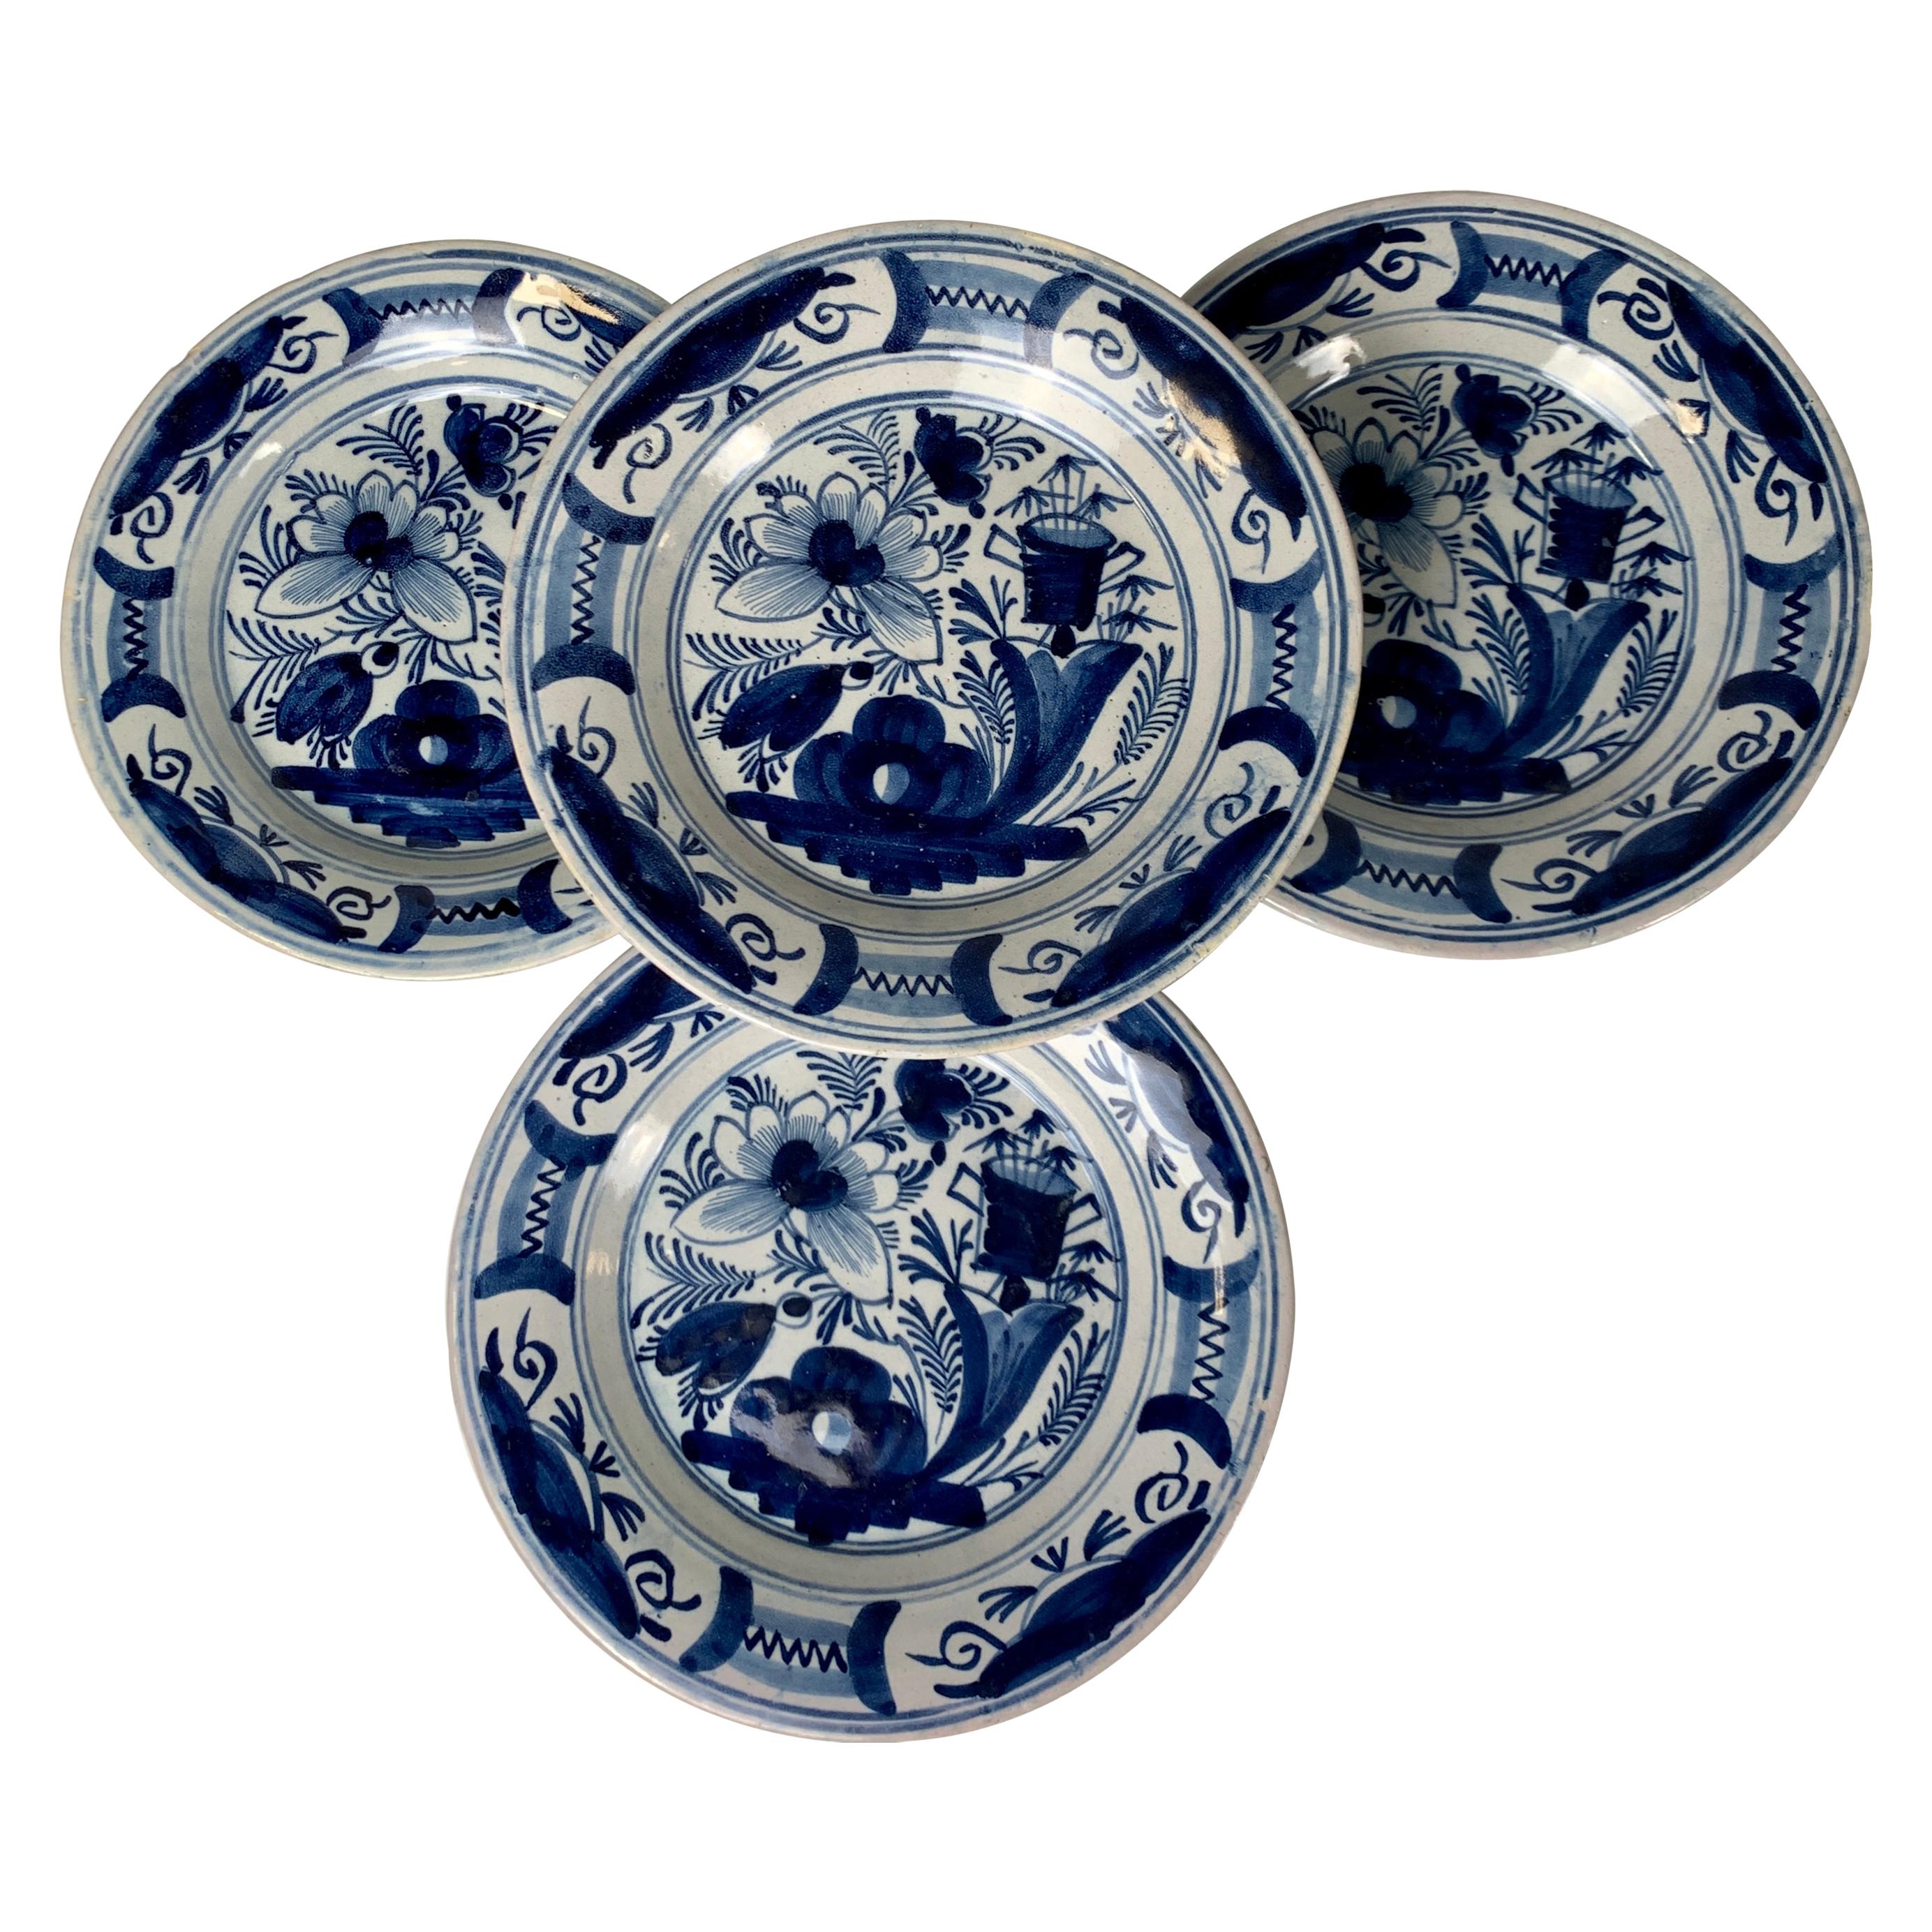 Four Blue and White Delft Dishes Made, Circa 1820